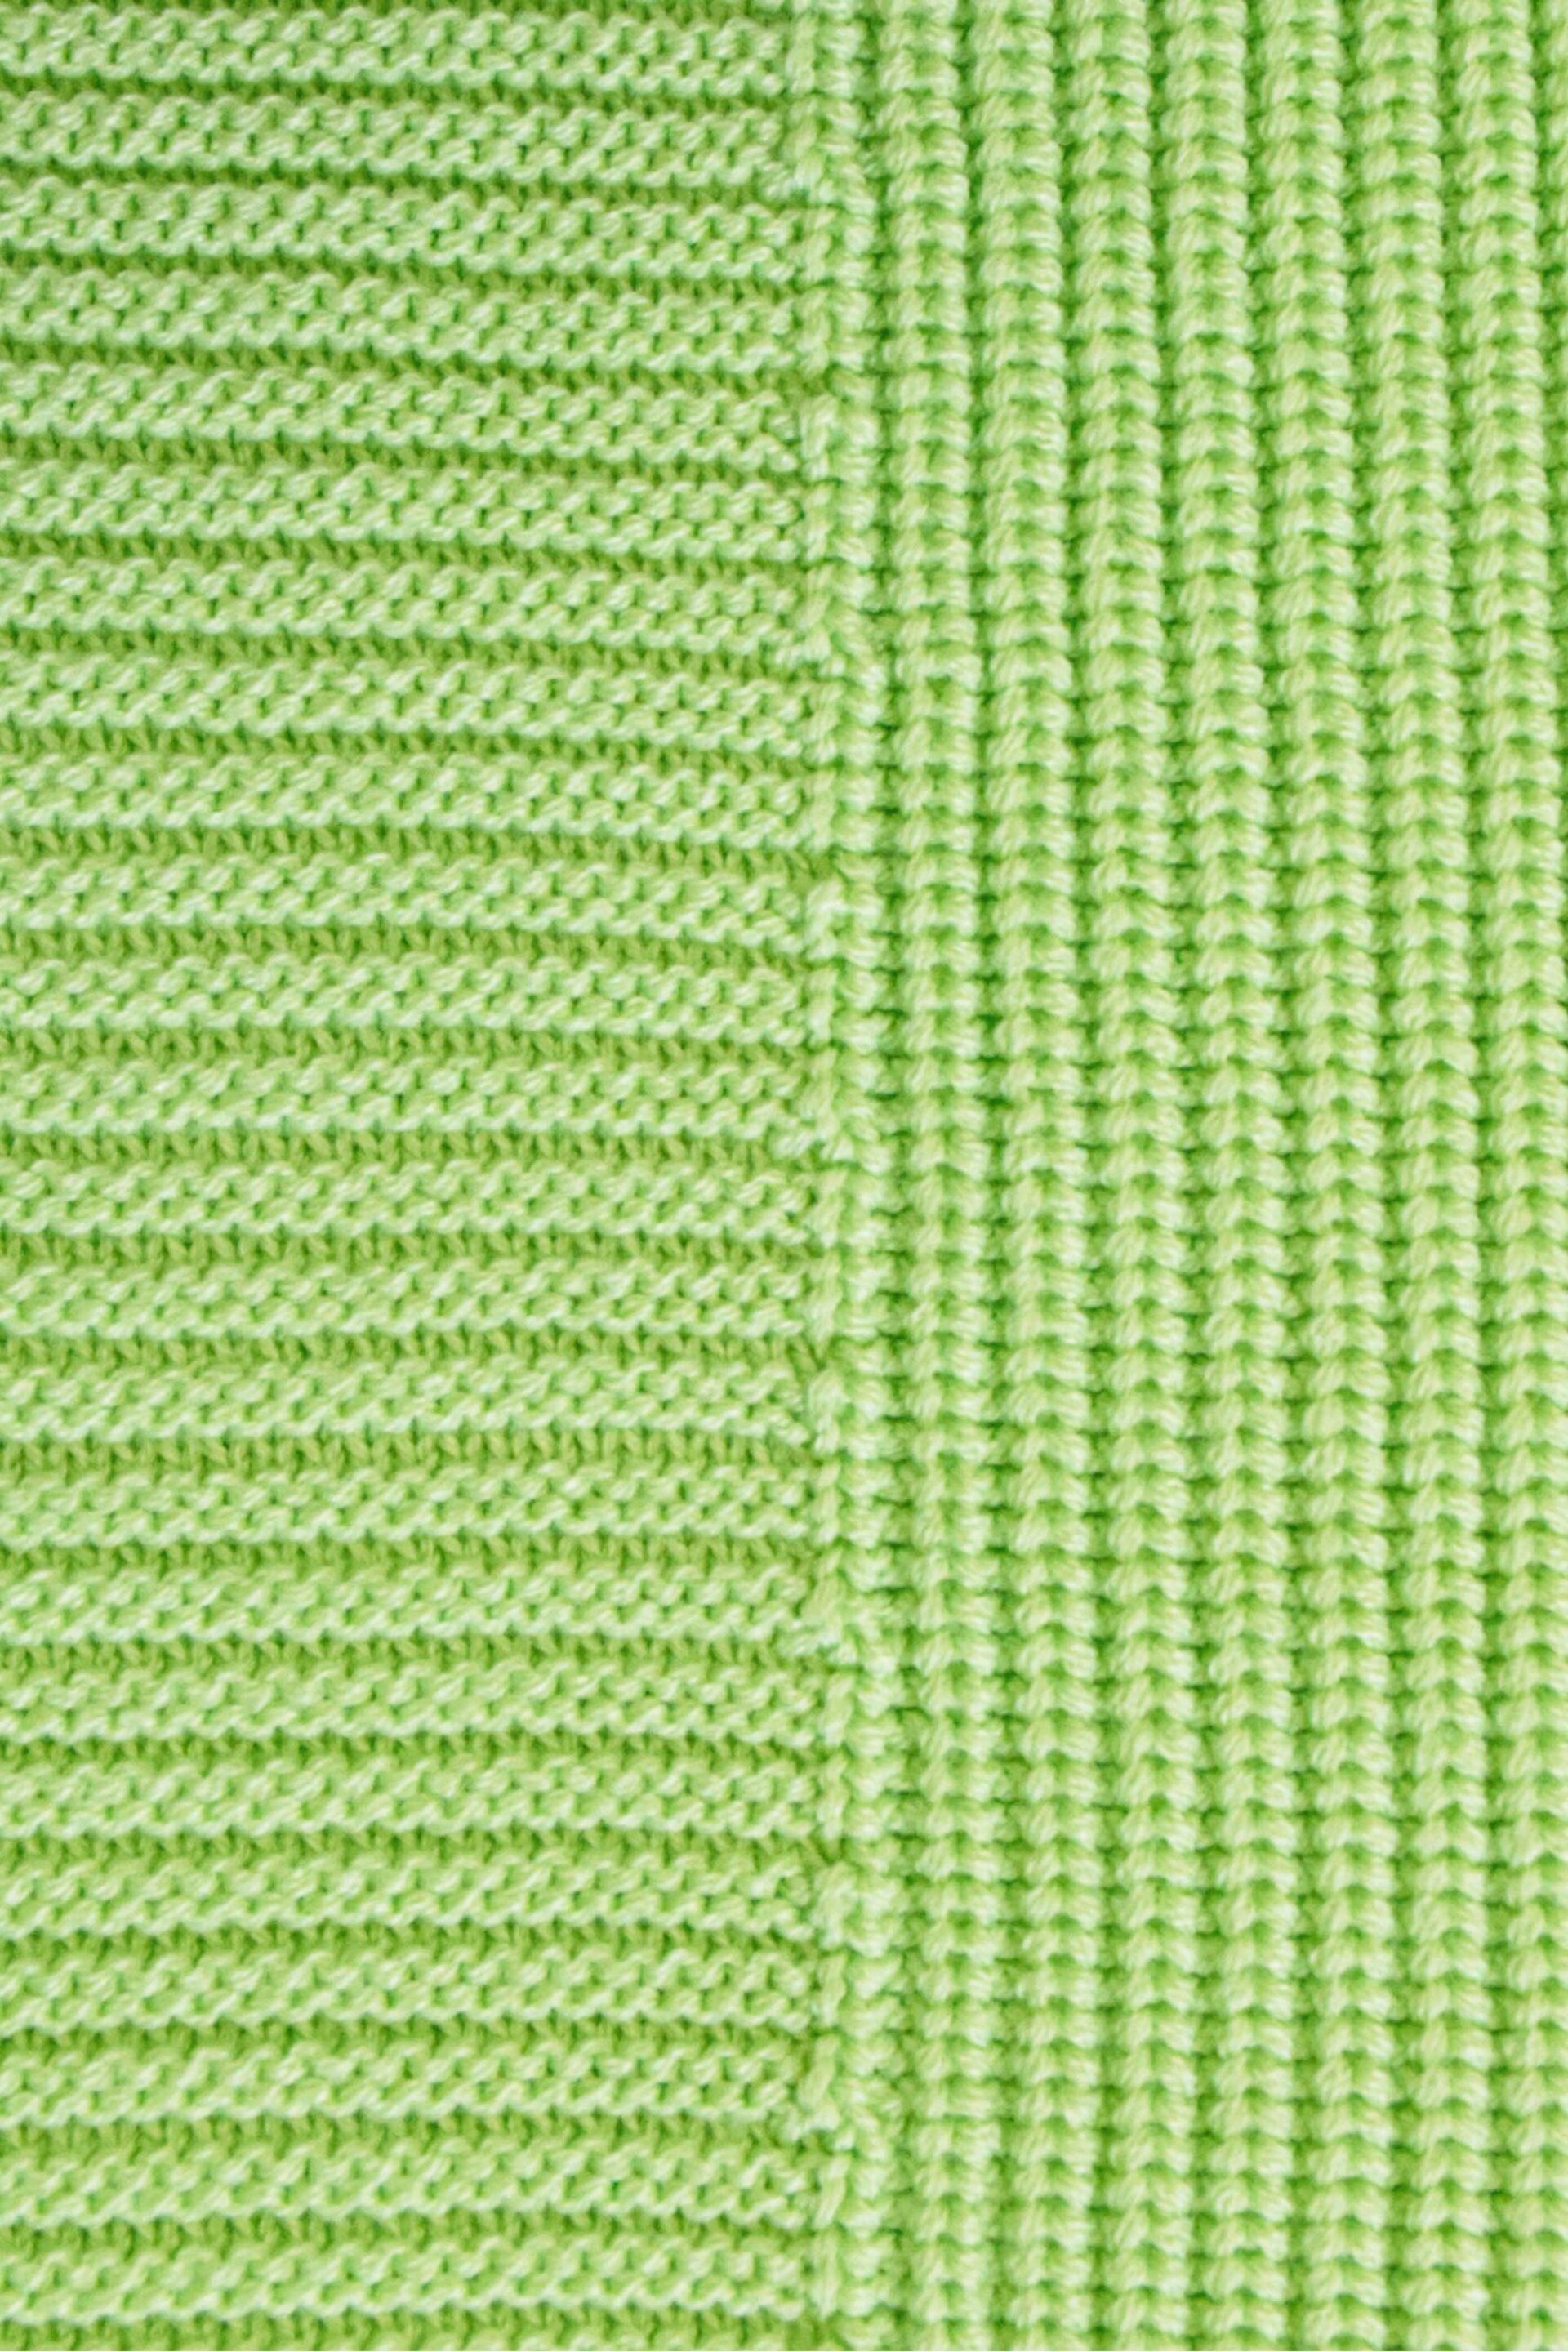 Ro&Zo Oversized Green Knit Tank Top - Image 6 of 6